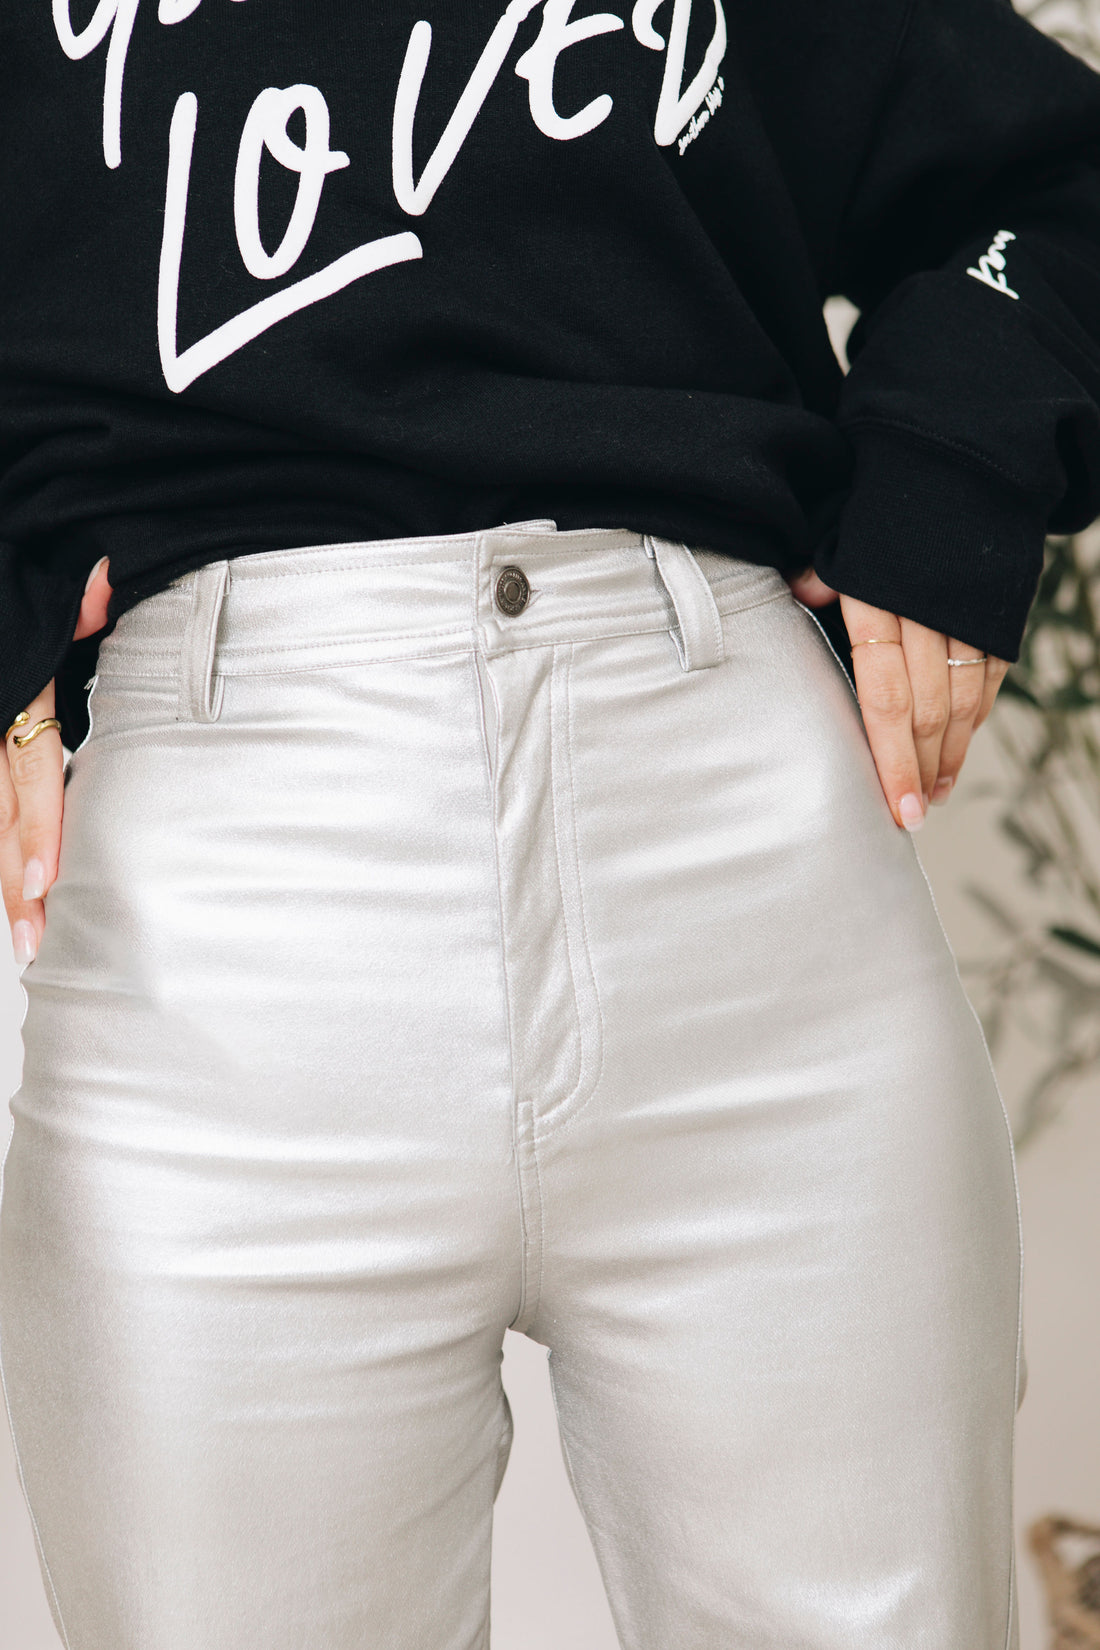 RESTOCKED! Silver Metallic STRETCHY Wide Leg Cropped Pants (S-XL)